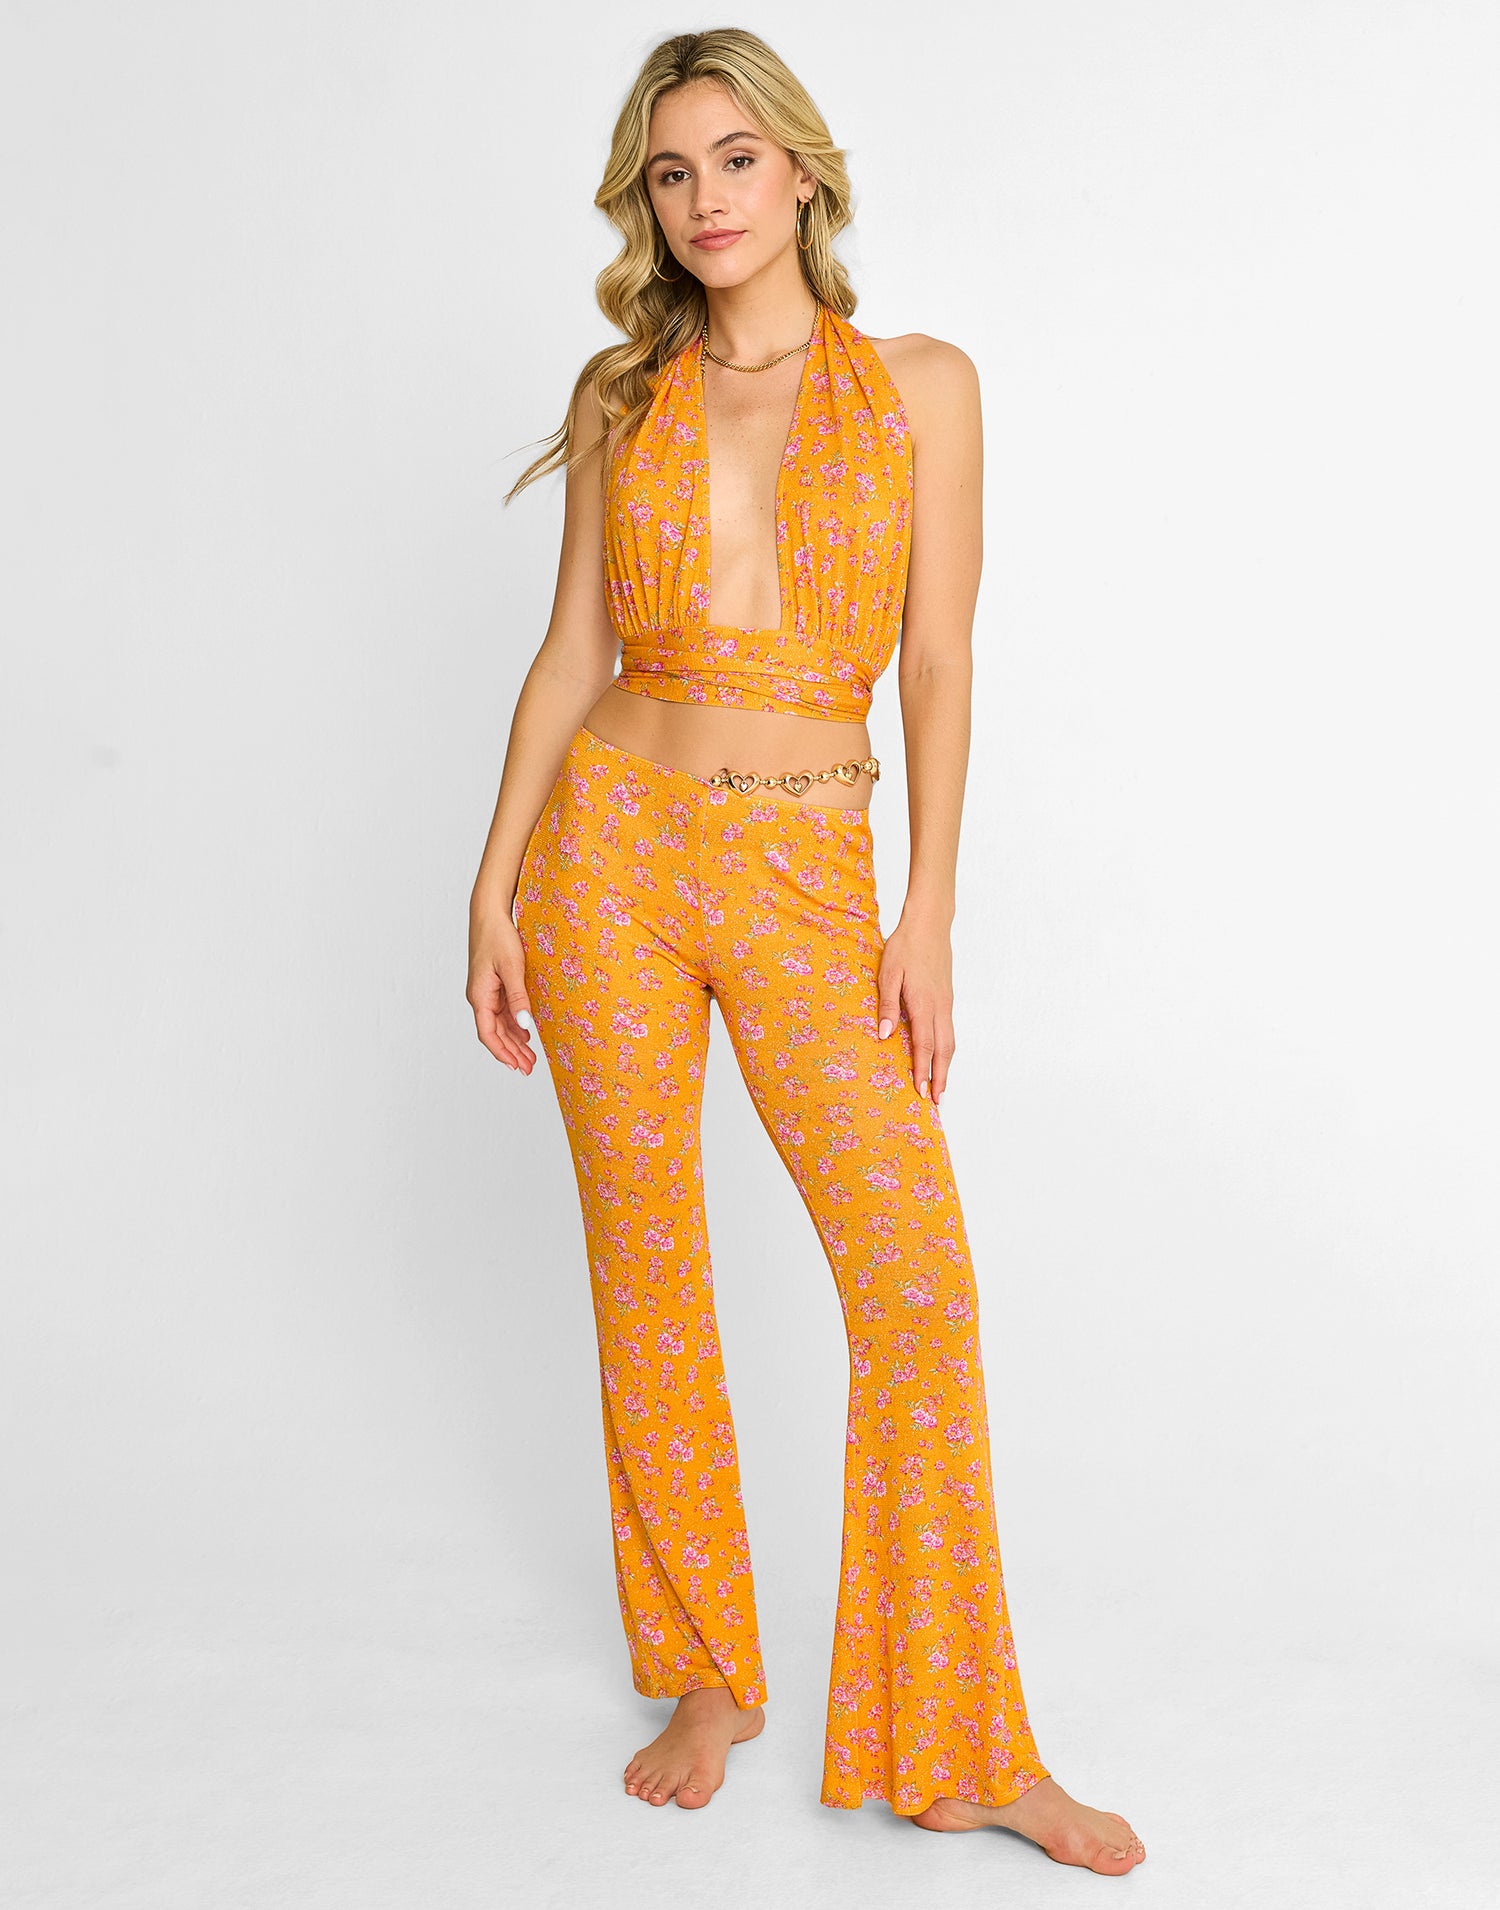 Saddie Knit Pant Cover Up in Orange Ditsy Floral with Gold Heart Hardware - Front View